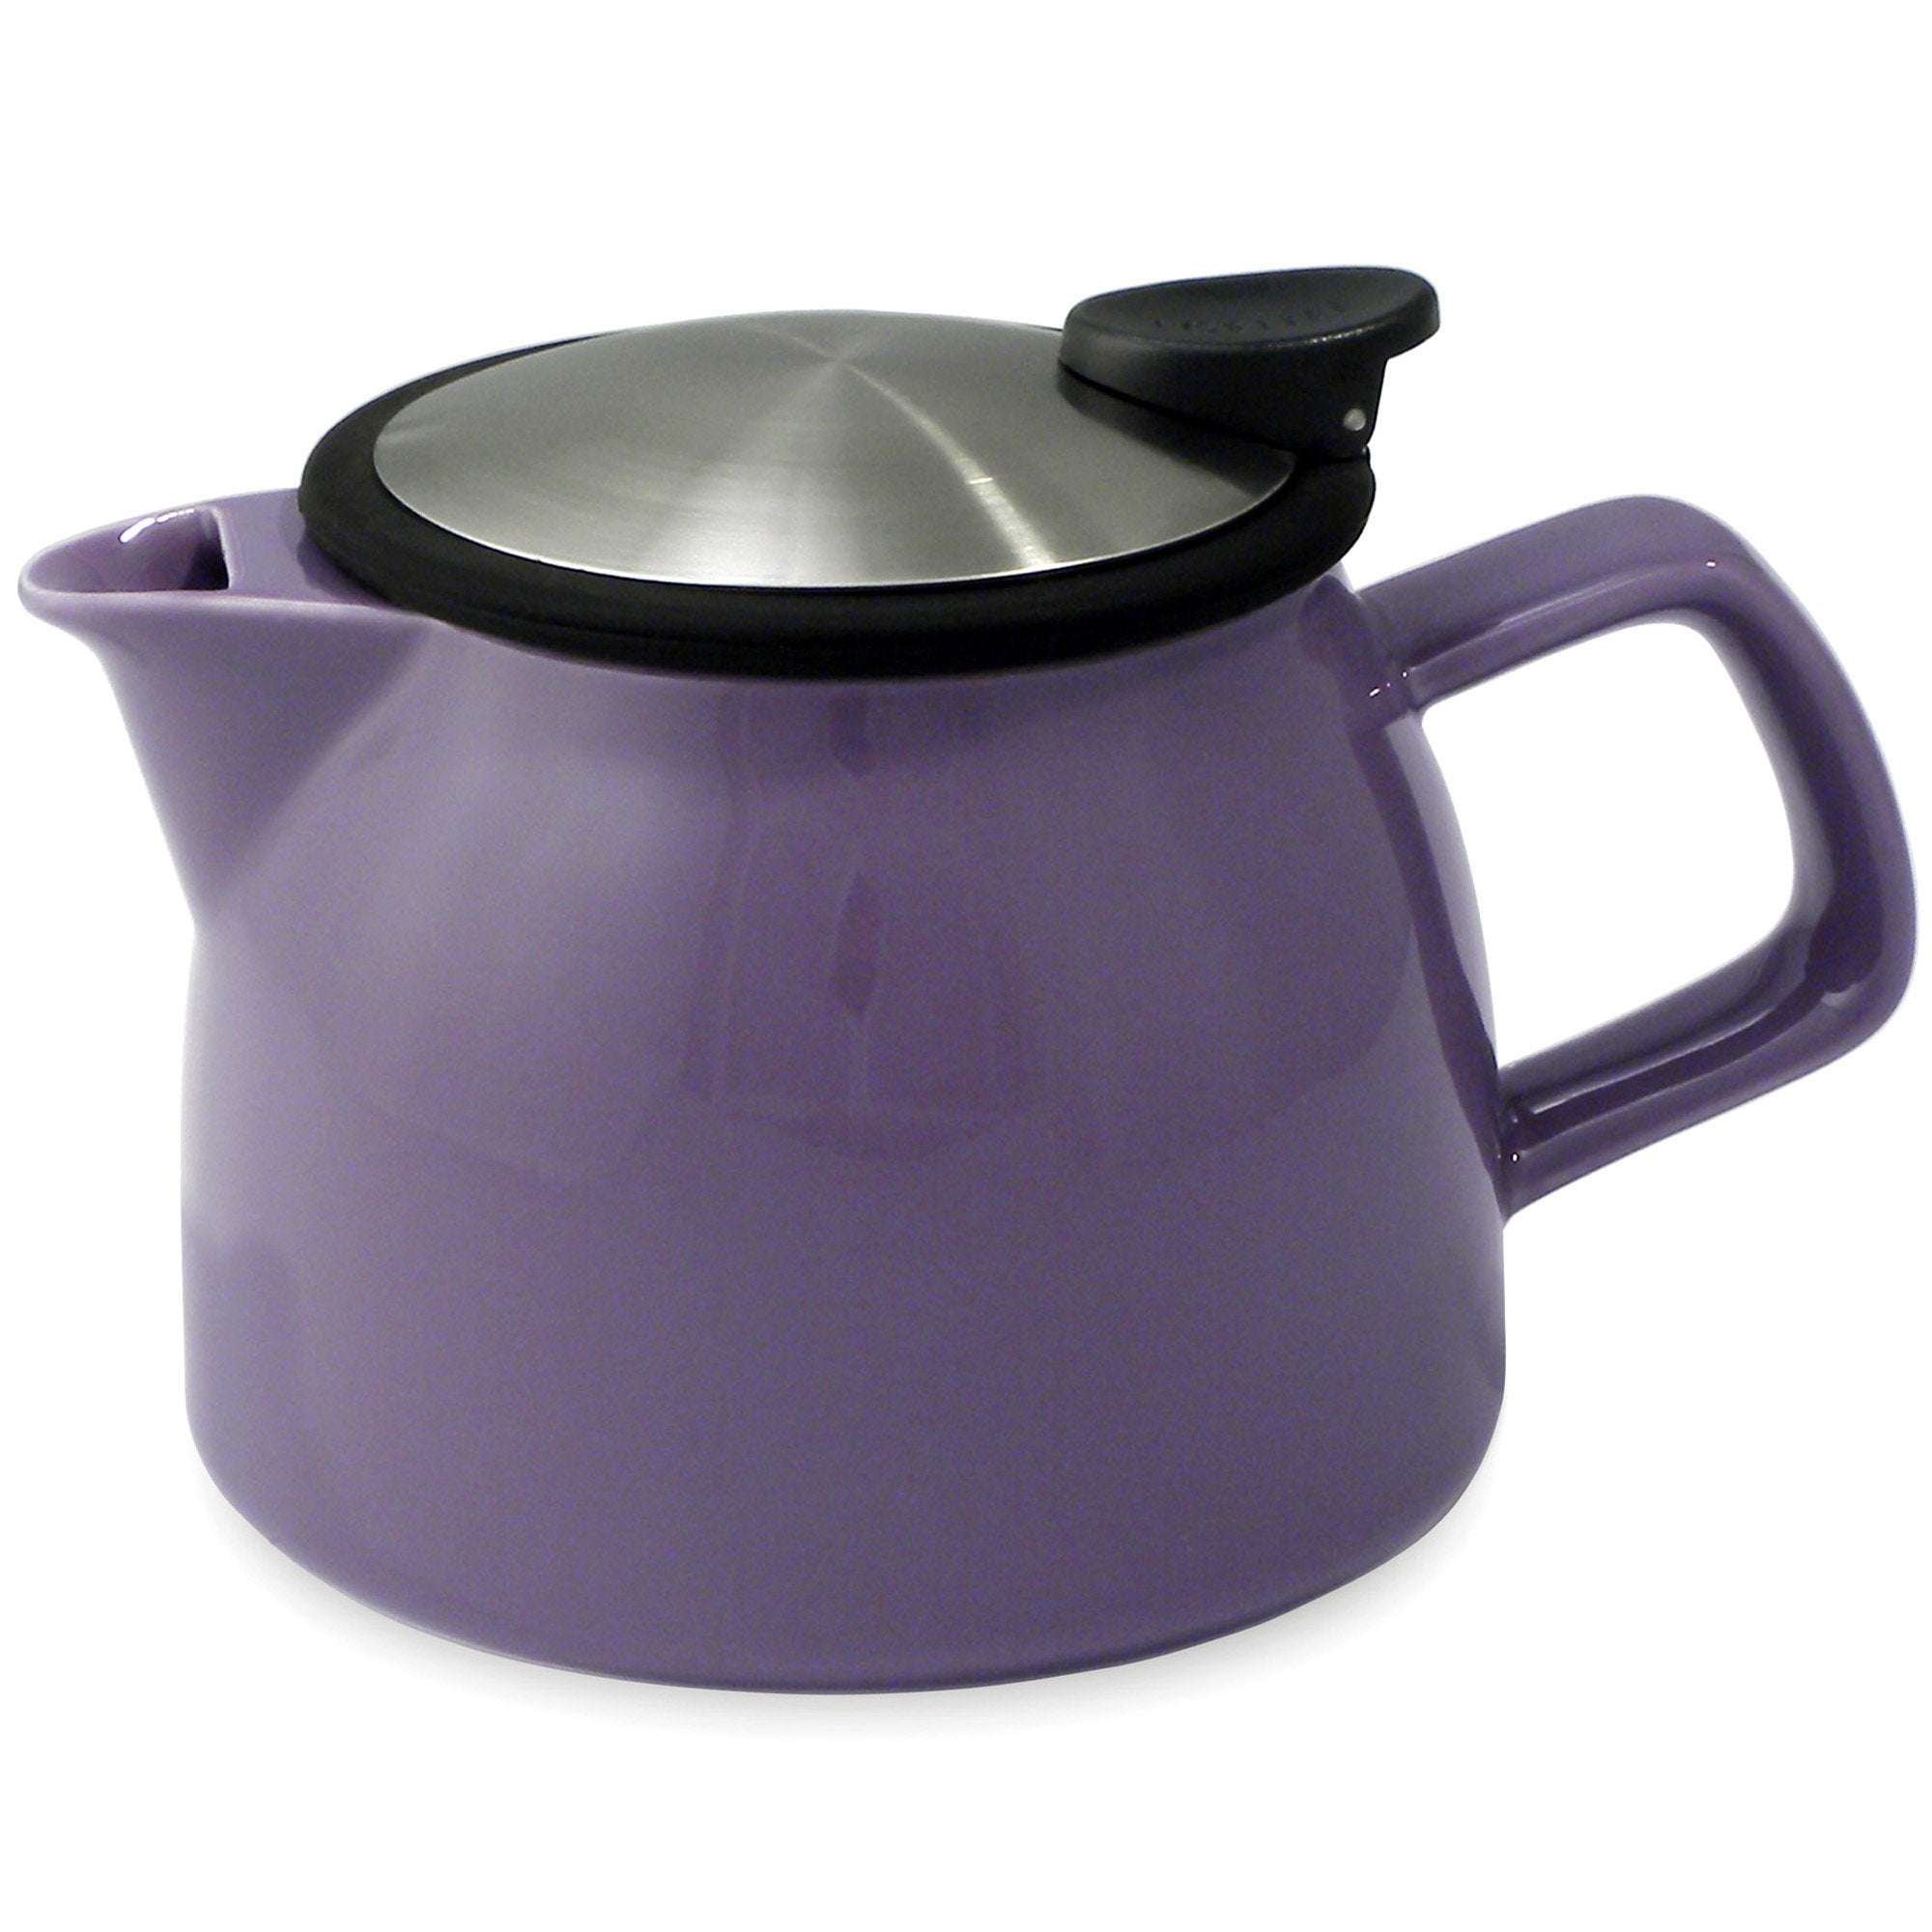 Tealula 16 oz bell-shaped  Purple teapot with square handle and detachable black and silver push-on-lid